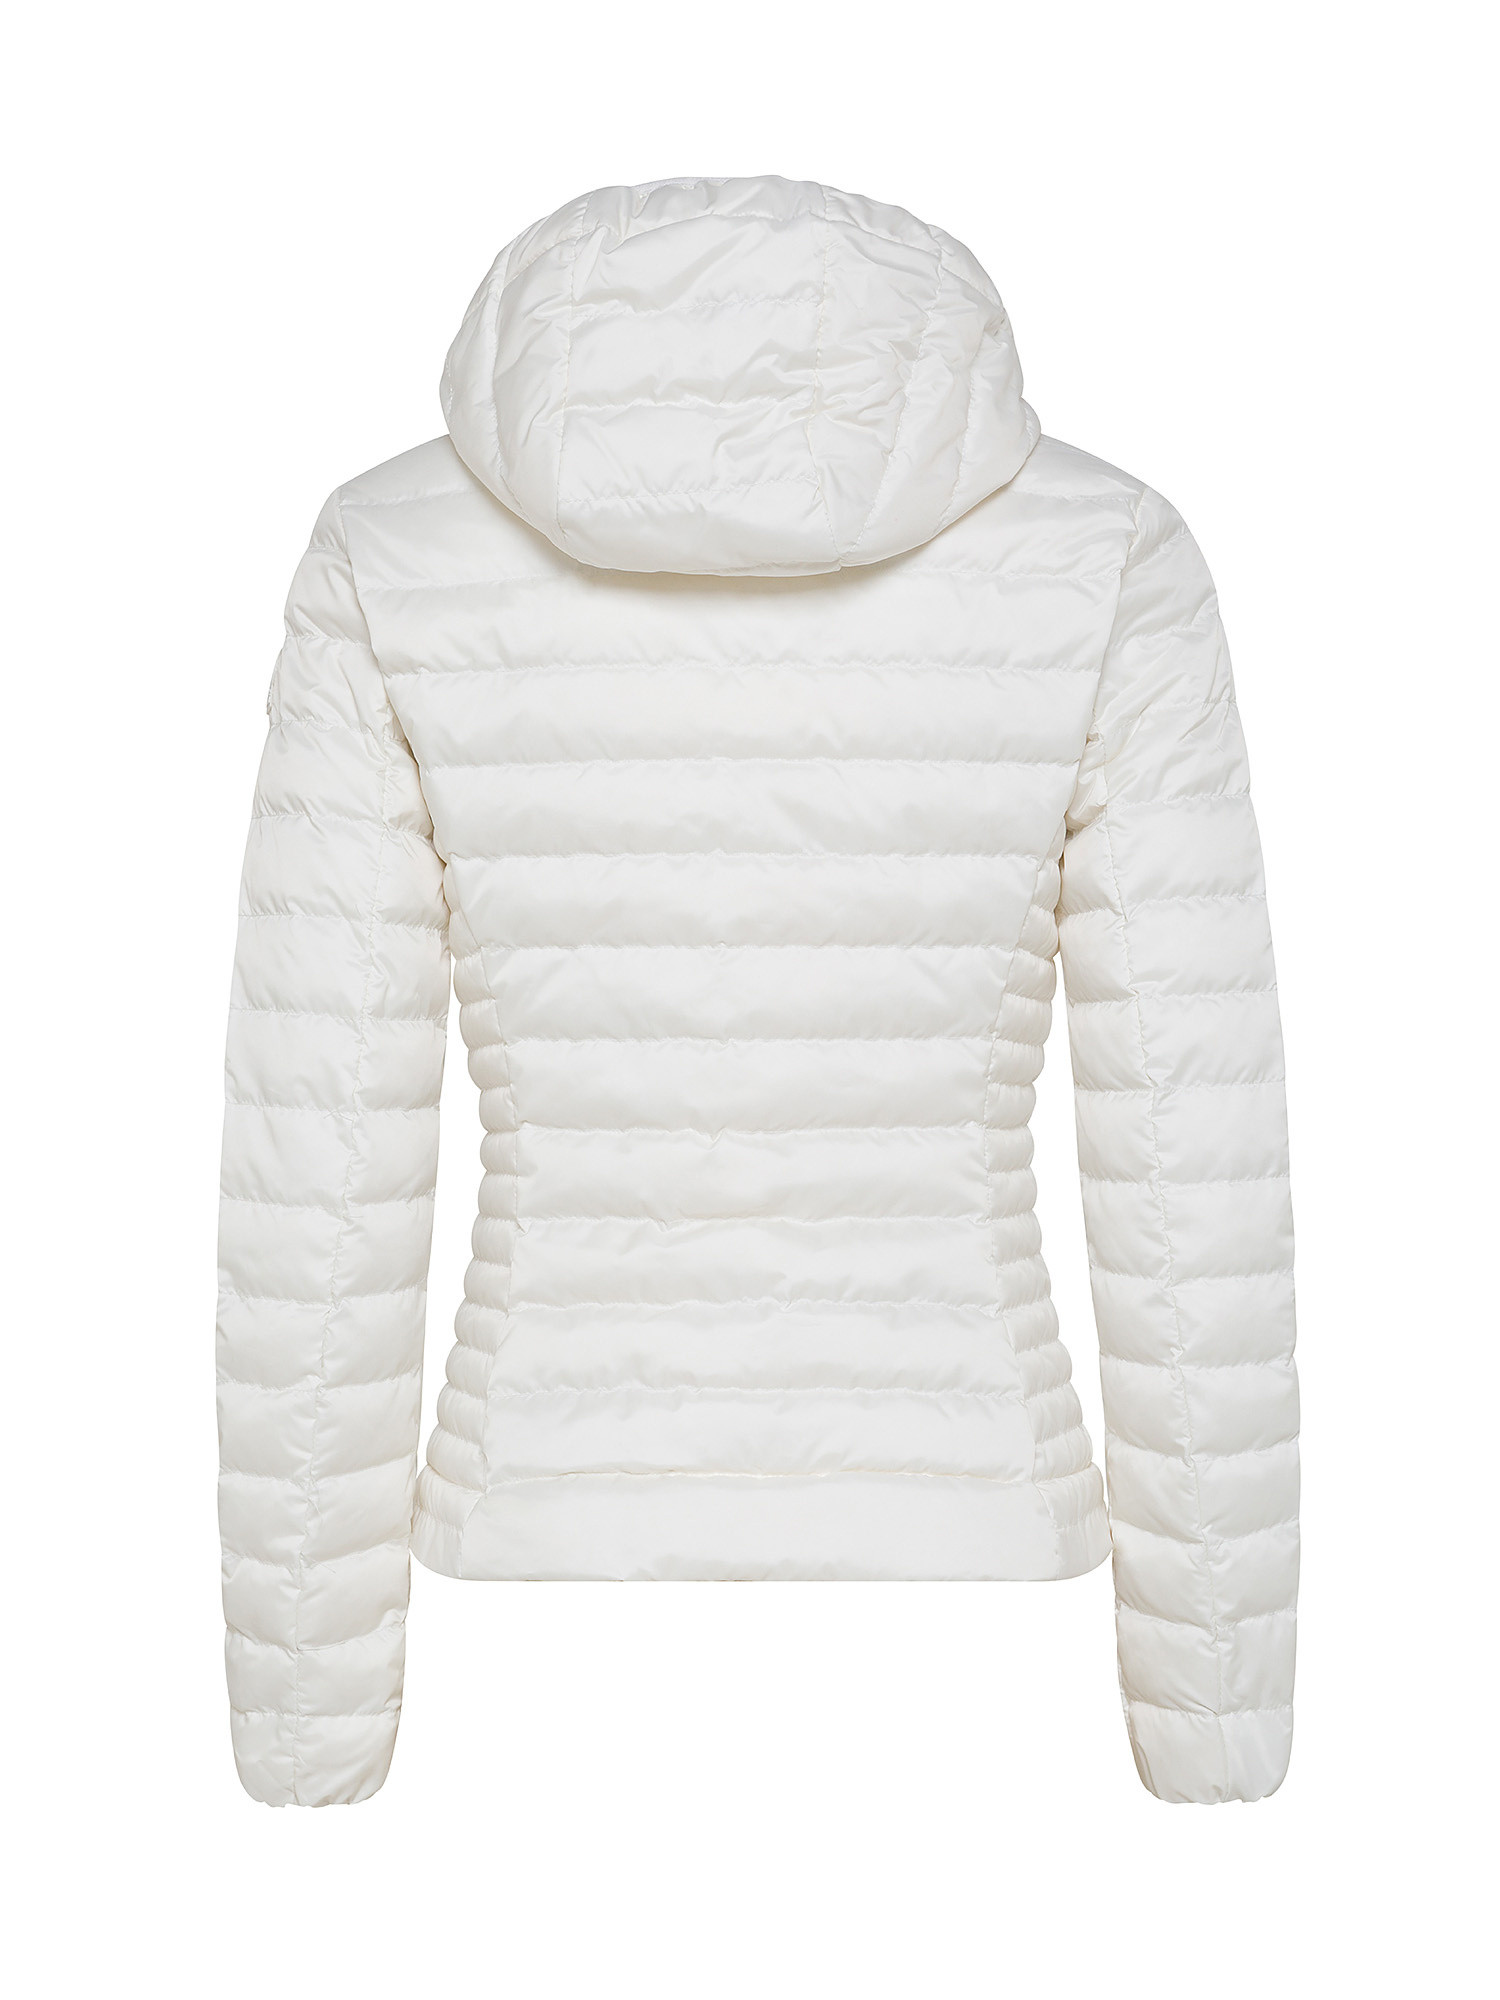 Ciesse Piumini - Carrie down jacket with hood, White, large image number 1